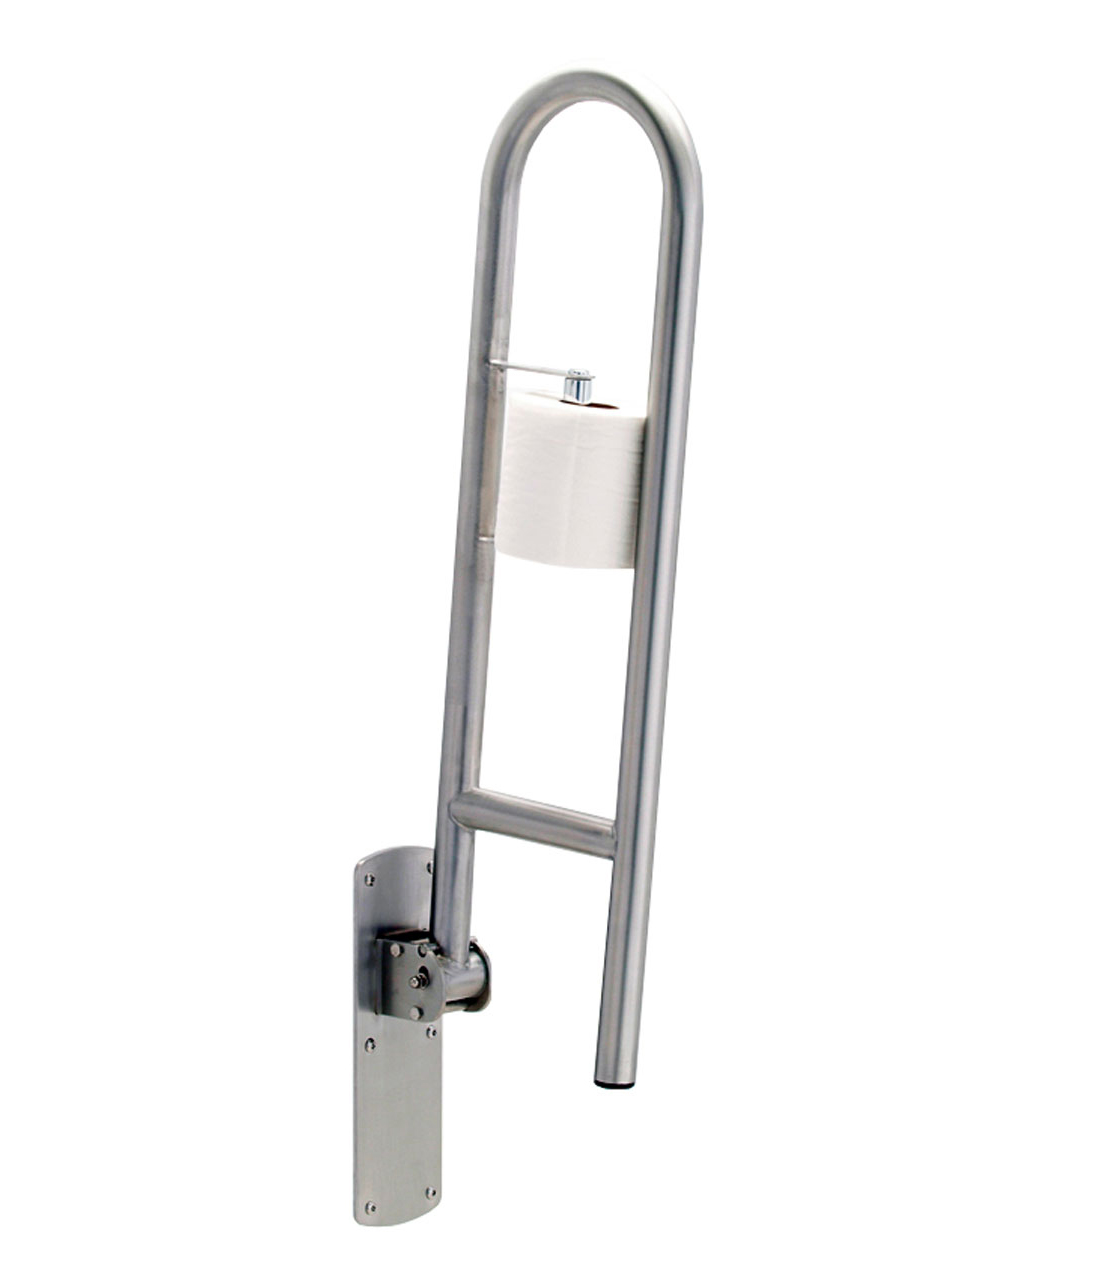 Swing Up Grab Bar with Integral Toilet Paper Holder - (Model #: 125-swing-up-ph)-image